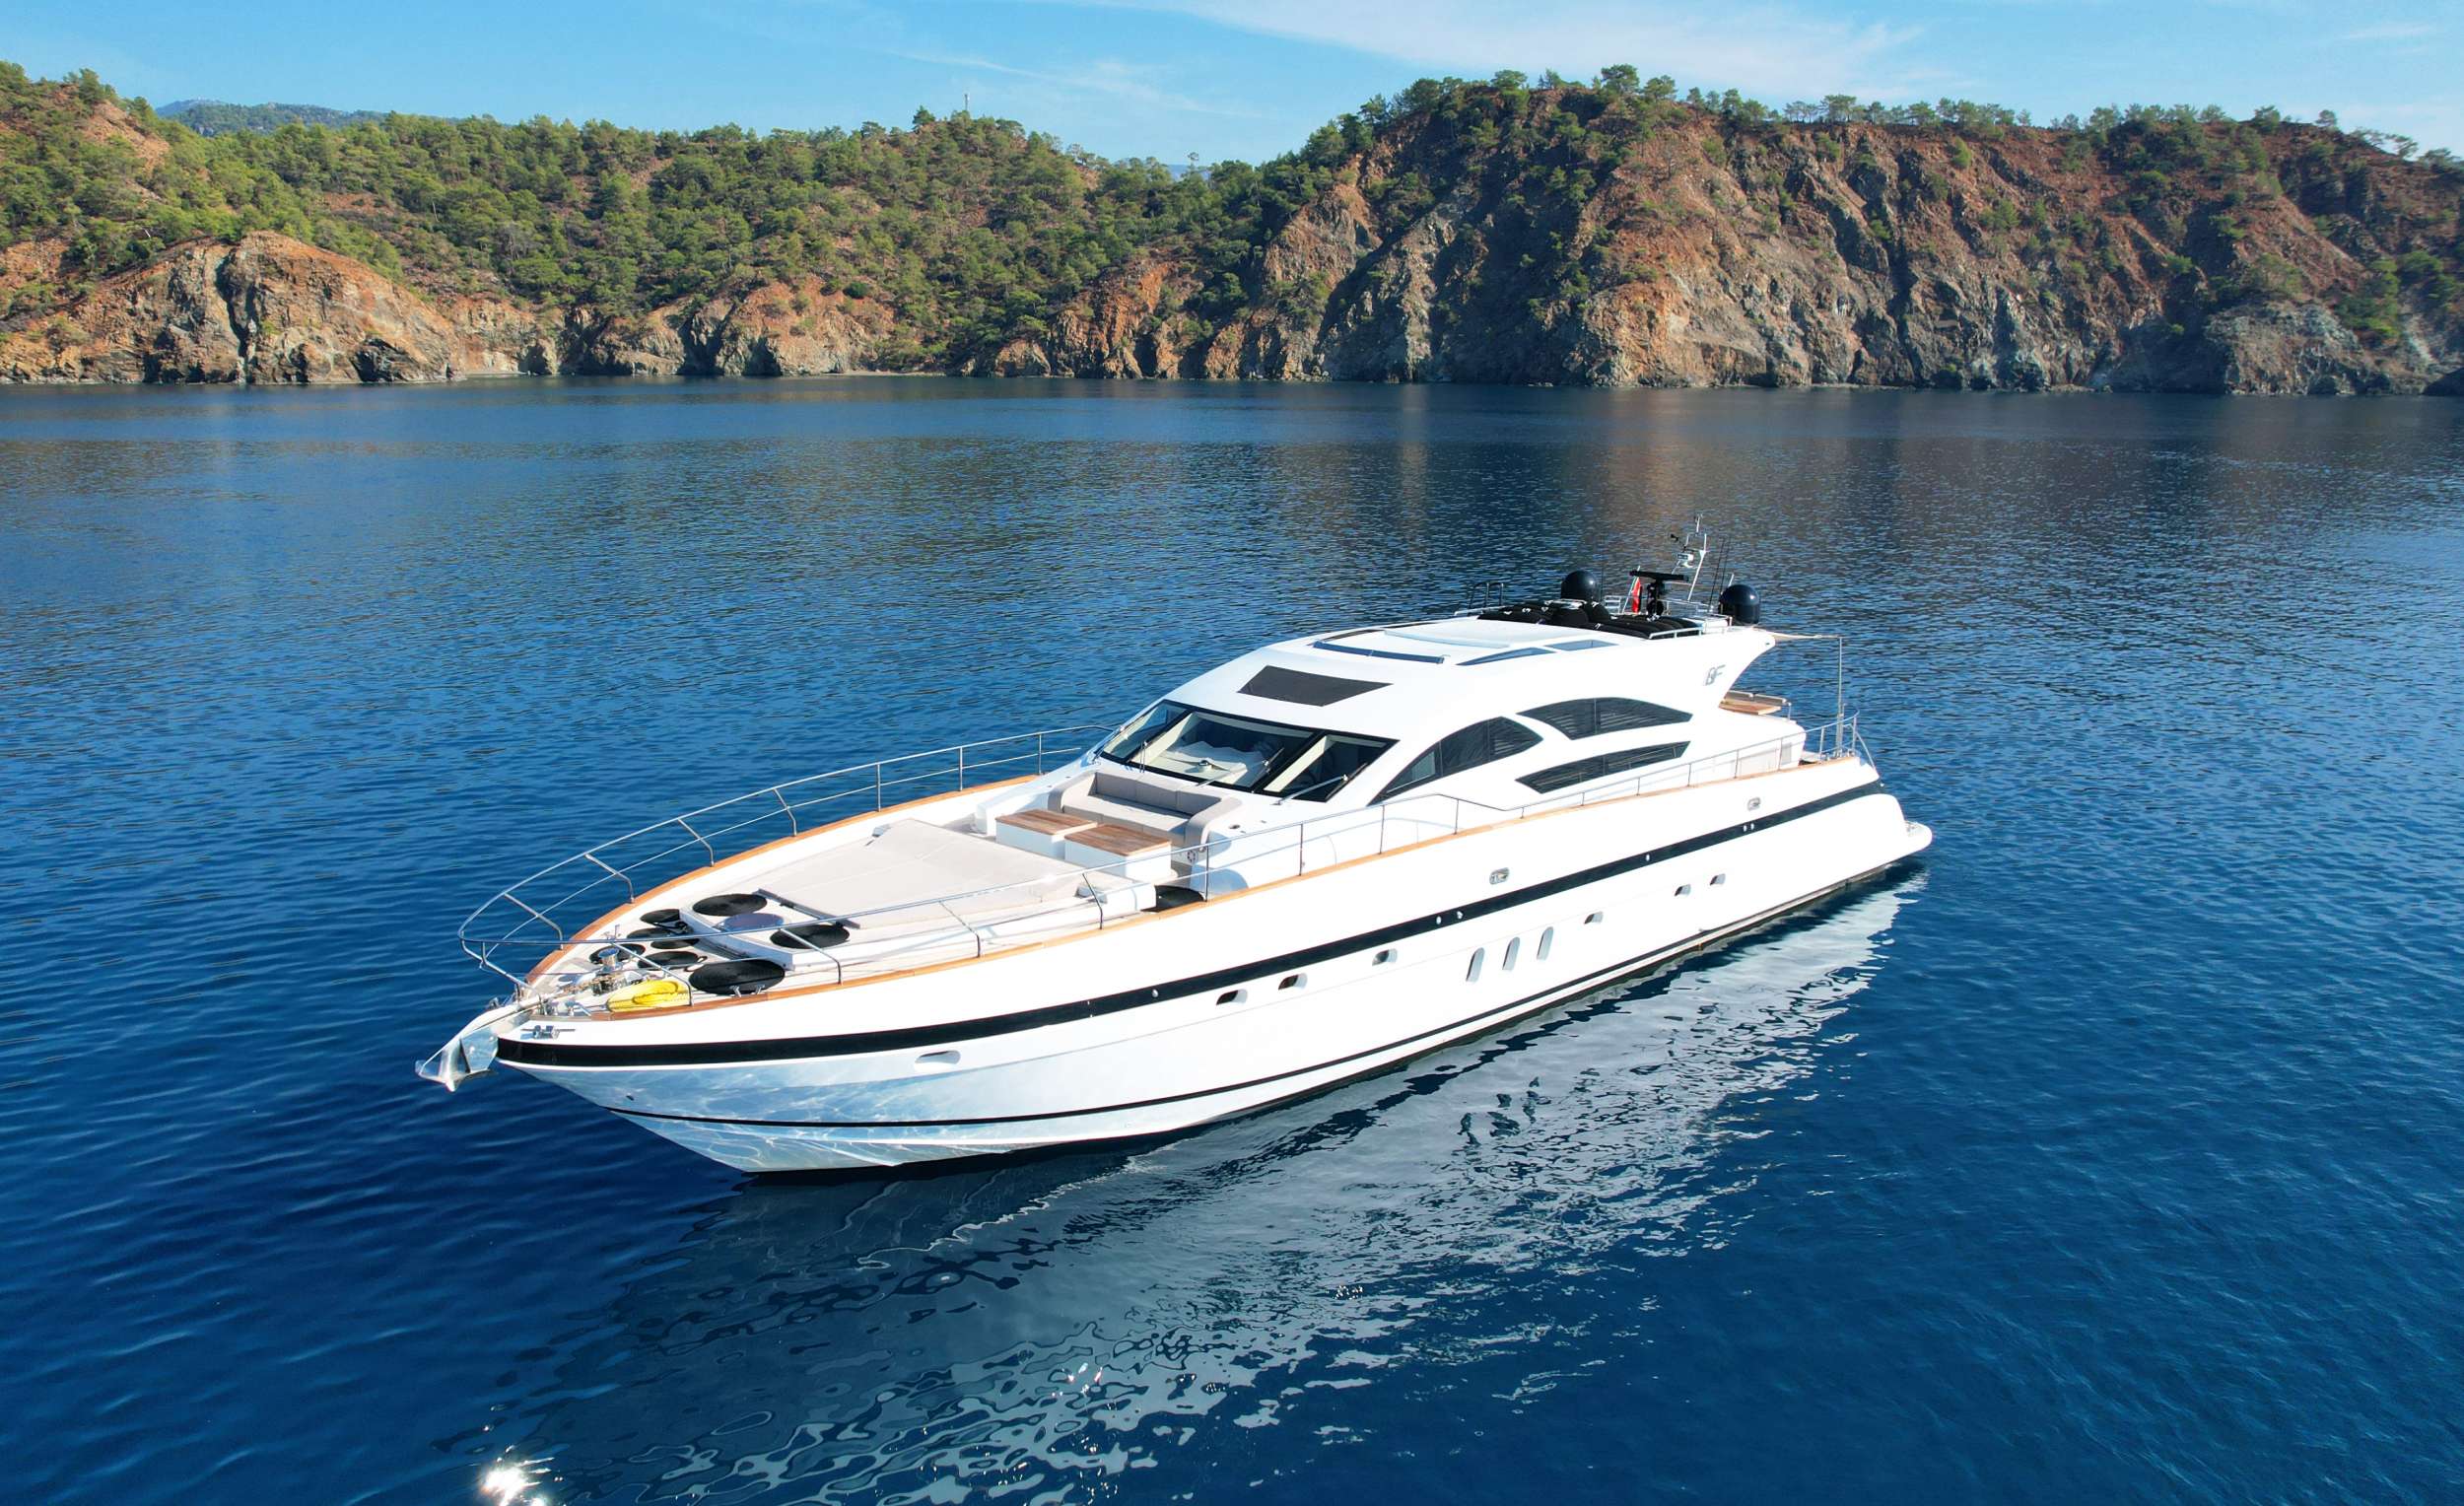 GOLDFINGER Yacht Charter - Ritzy Charters